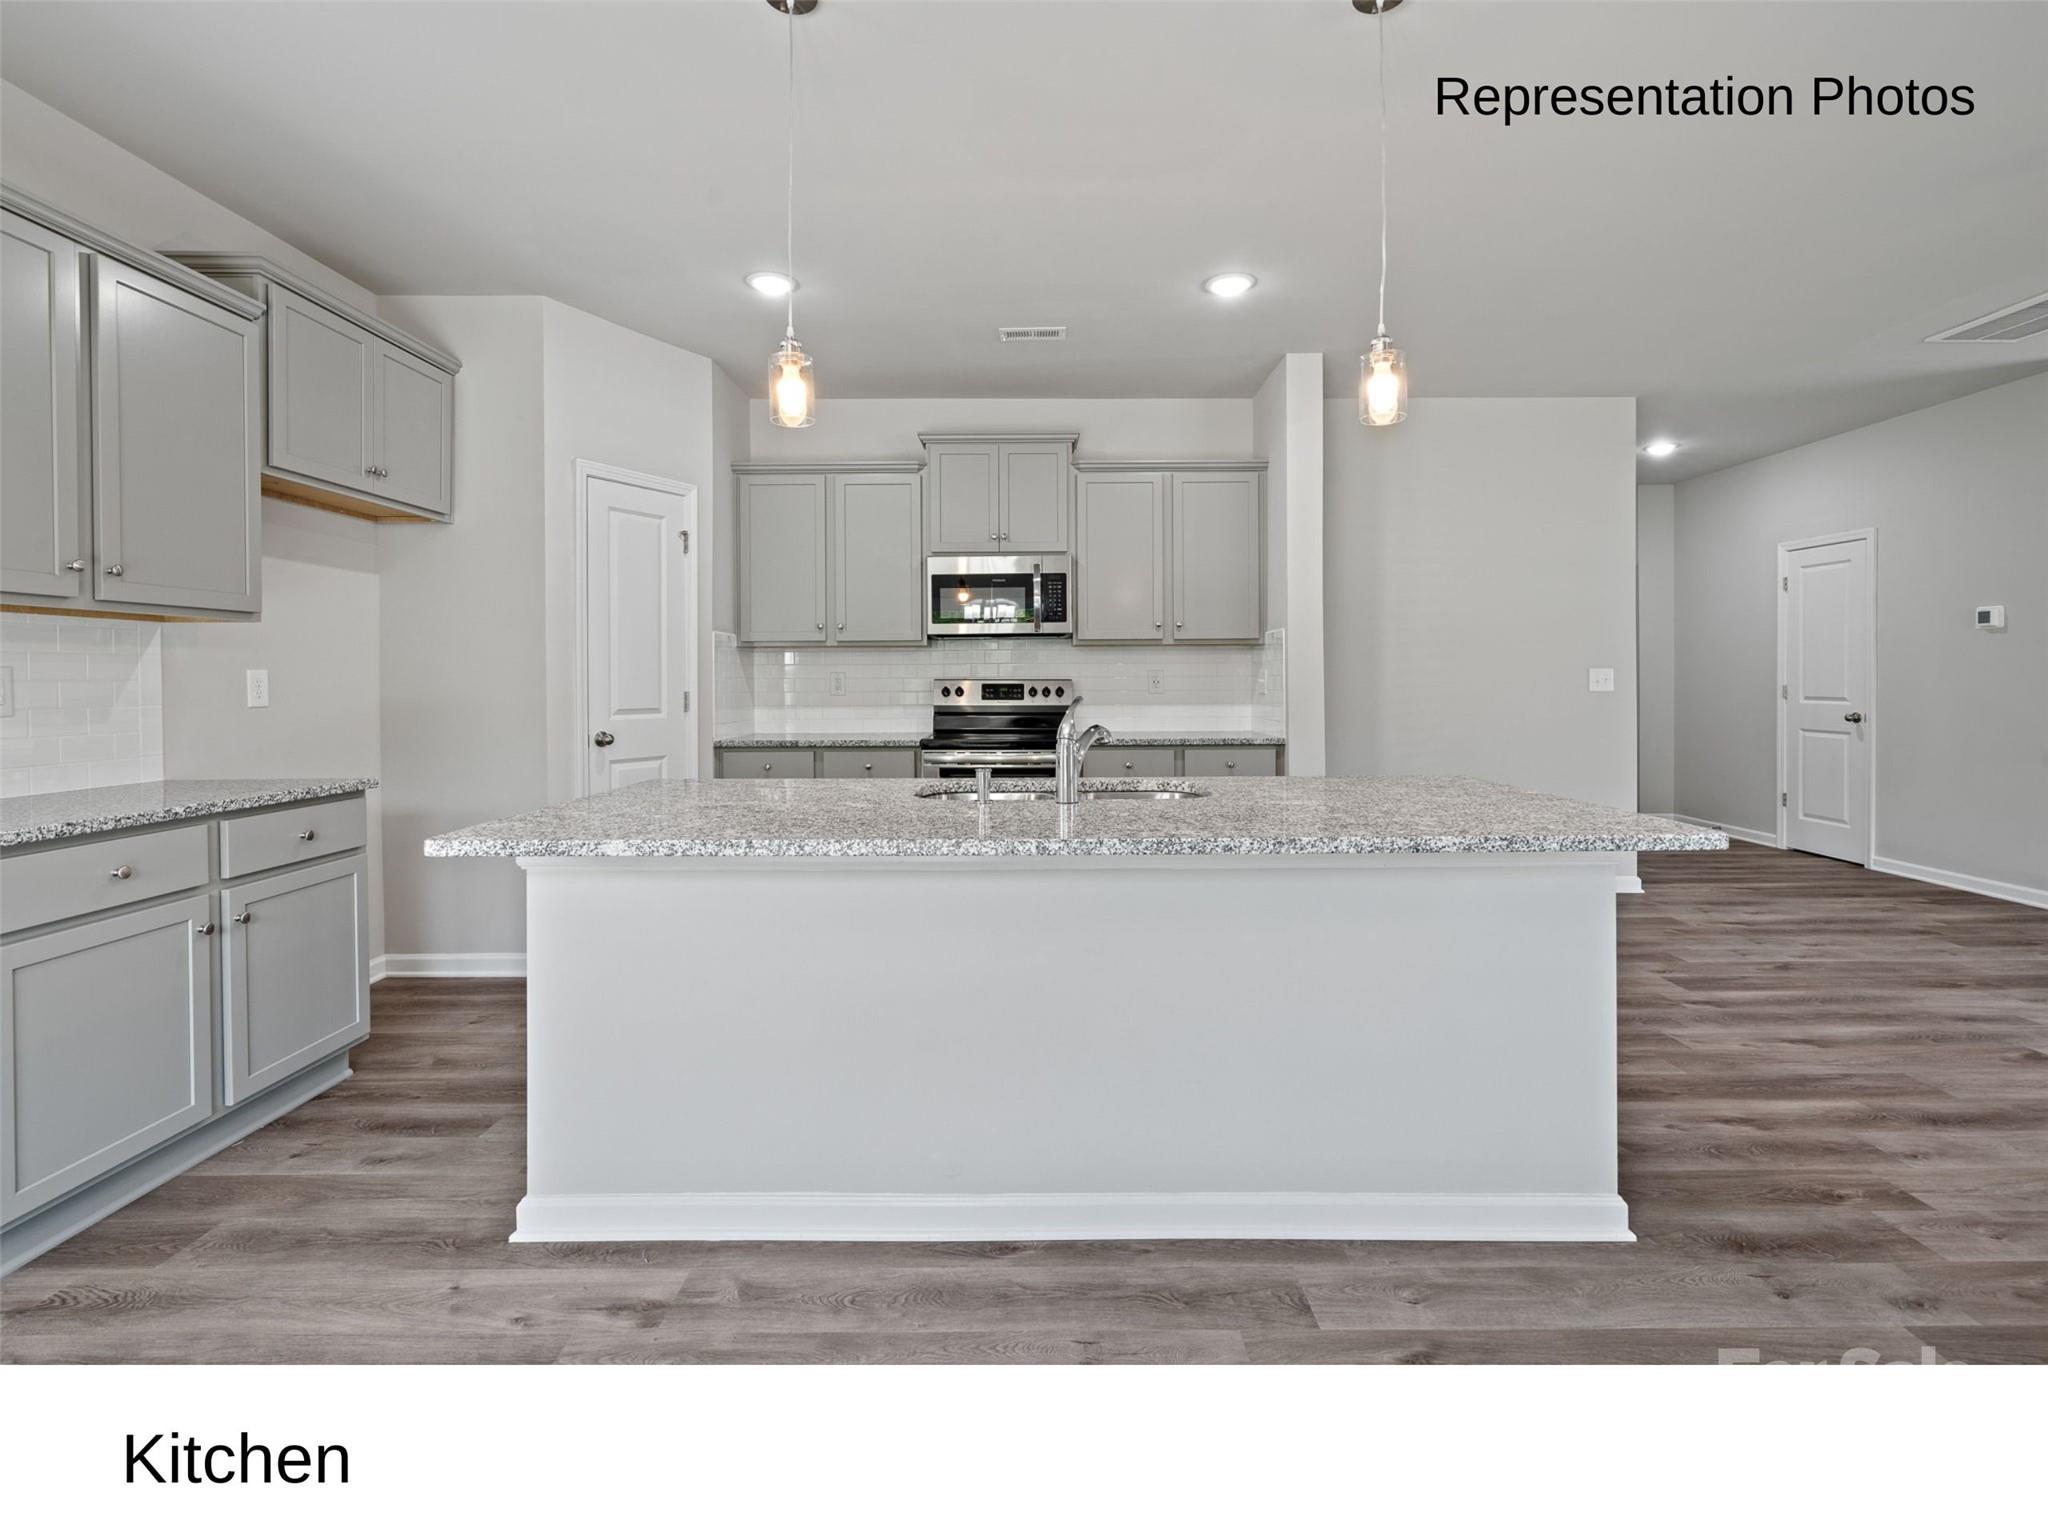 a view of kitchen countertops with cabinets and wooden floor